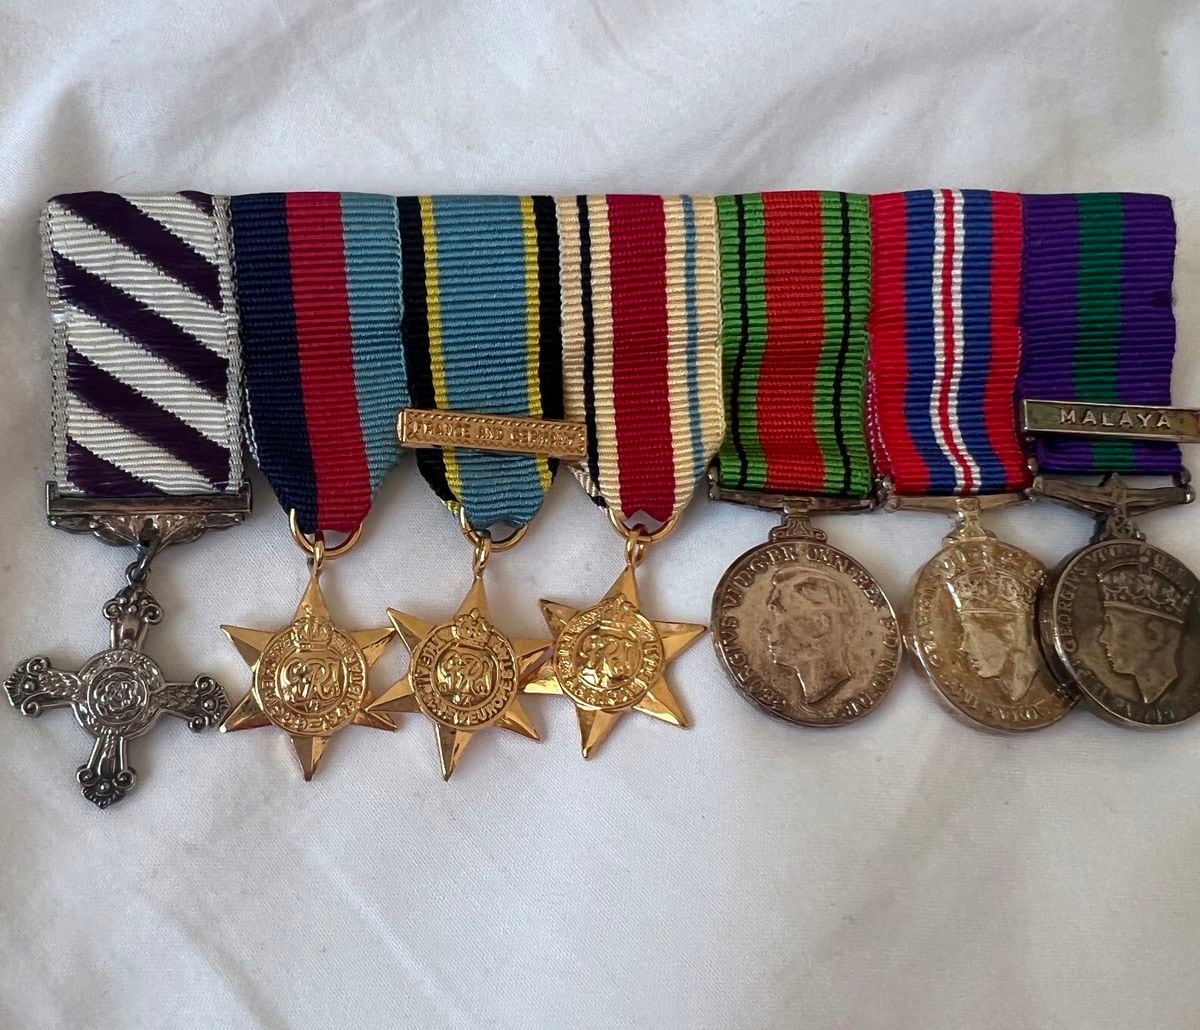 These miniatures of Peter's medals are cherished possessions for granddaughter Jessica.